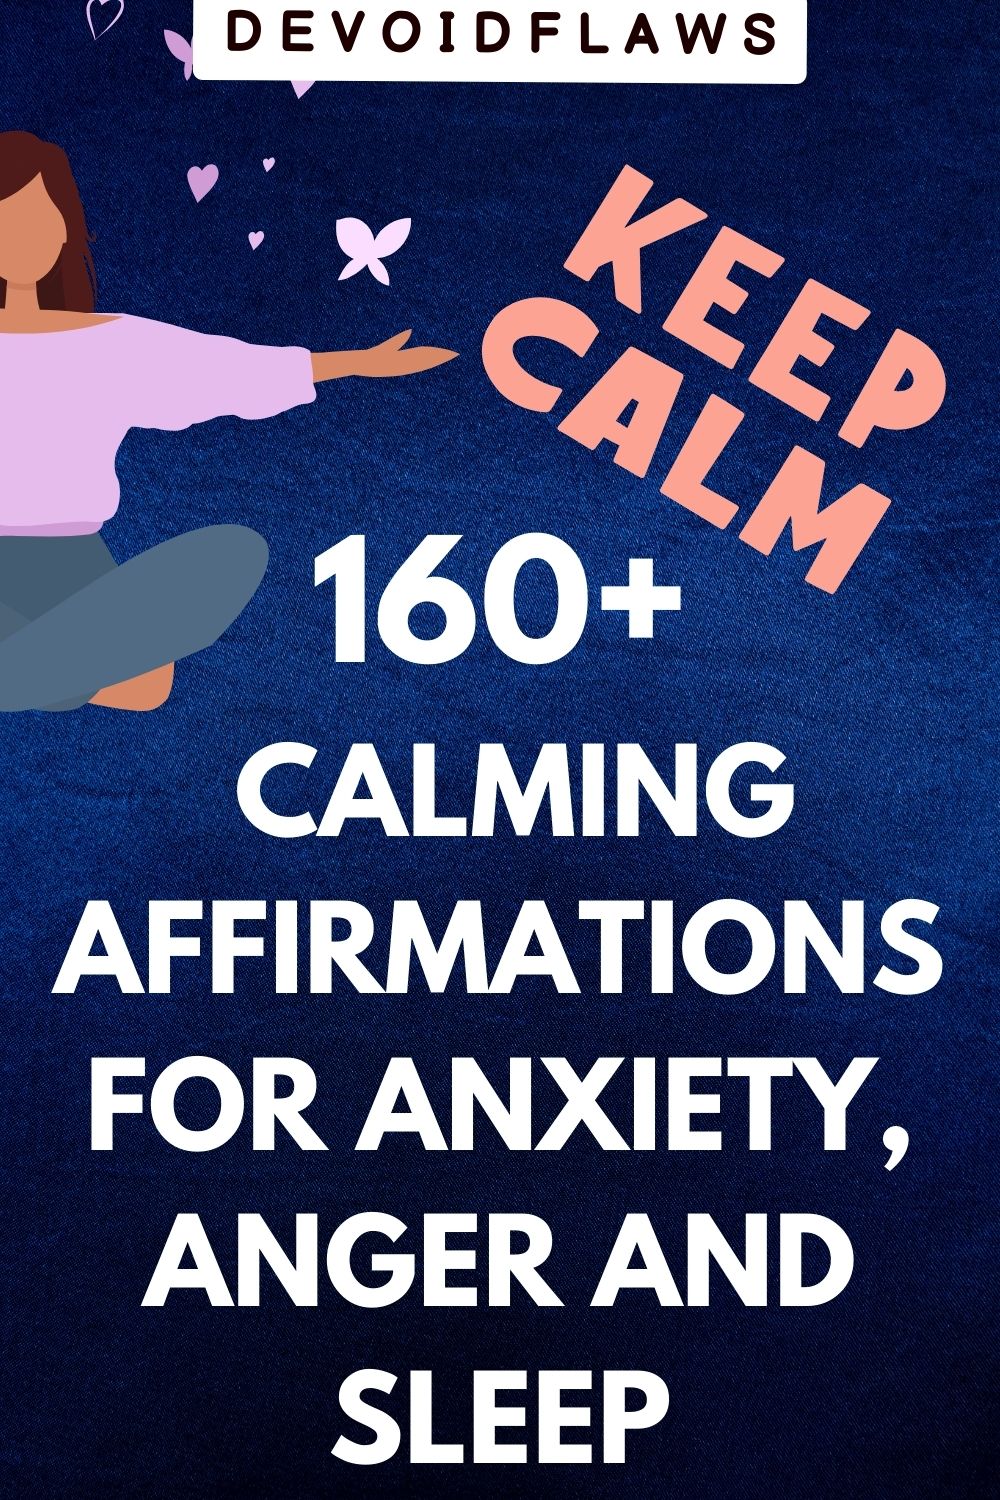 blue background image with text "160+ affirmations for anxiety, anger and sleep"